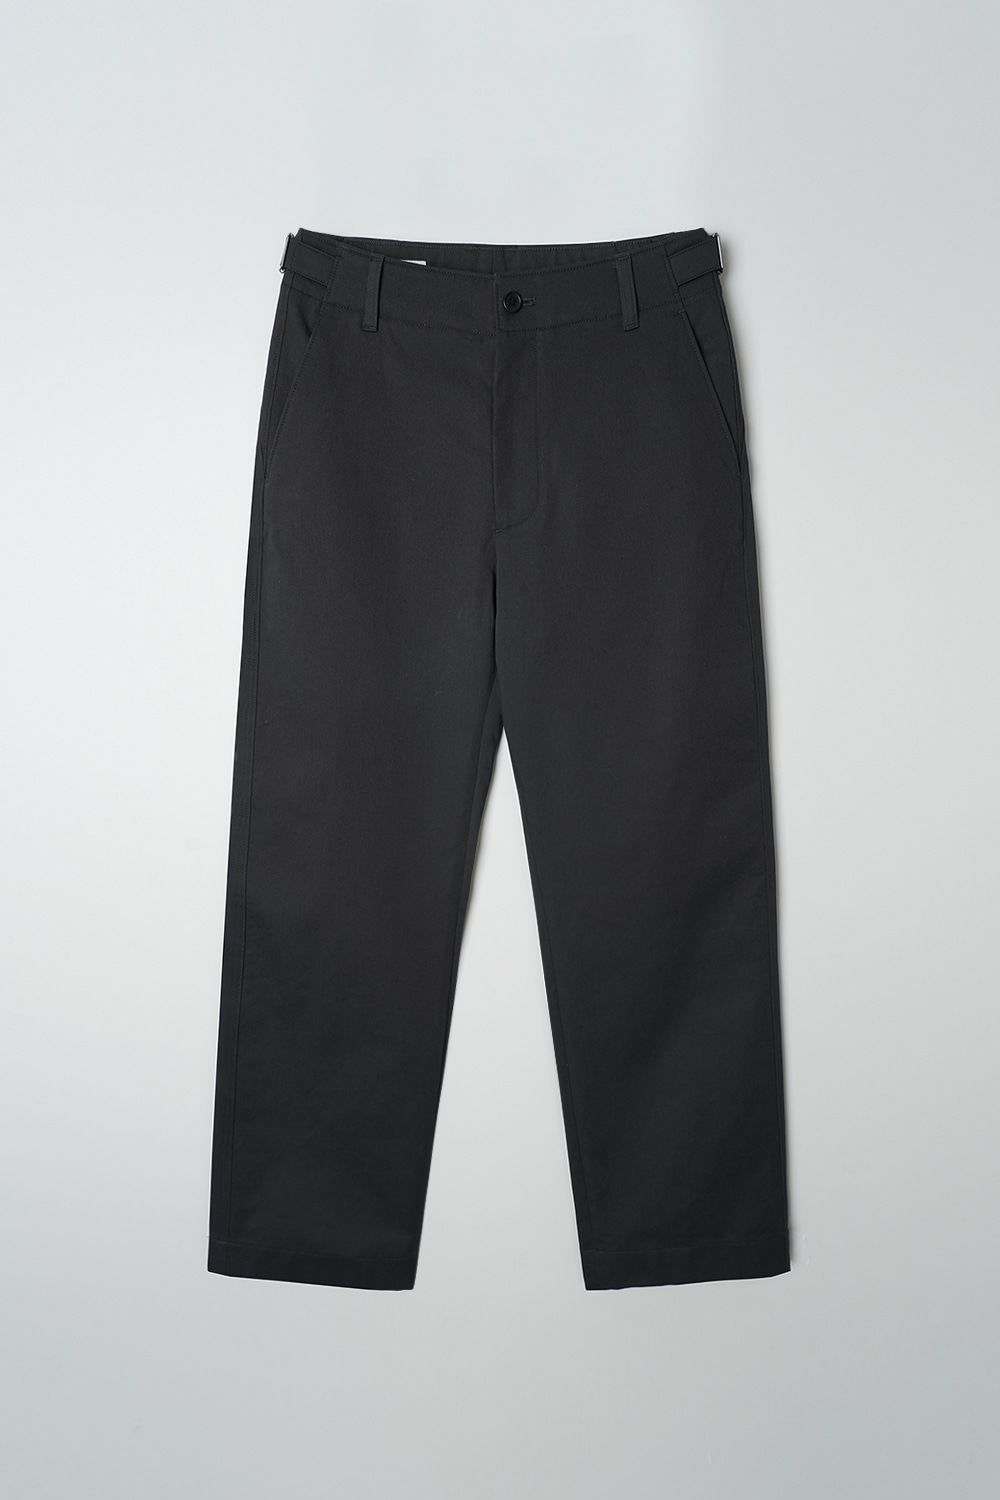 22AW OFFICER CHINO PANTS - ANTHRACITE